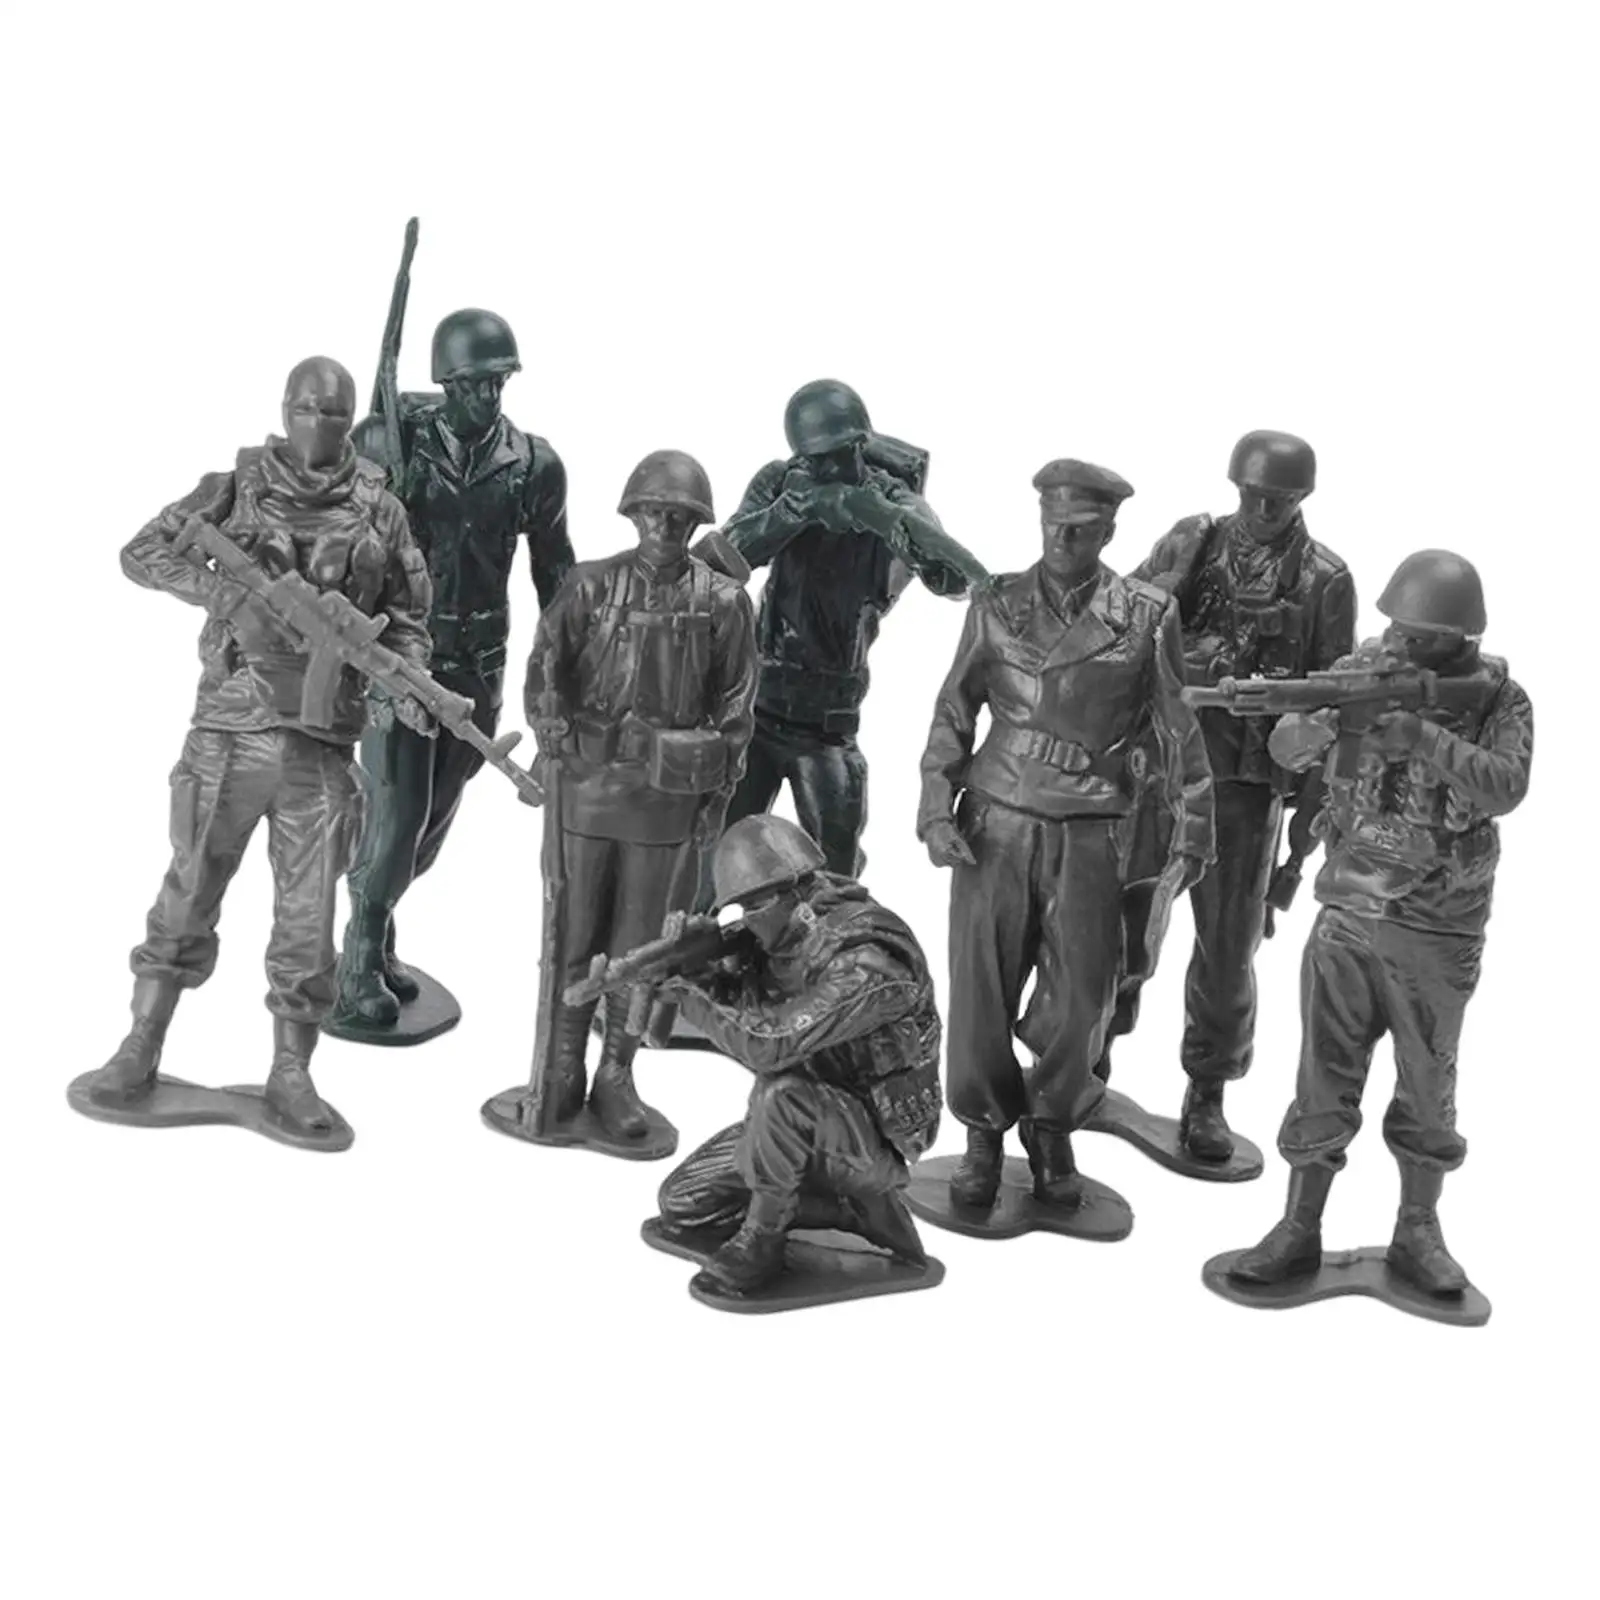 8Pcs 1:18 Scale Action Figure Toy Soldiers Playset Building Accessory Diorama Scenery Layout Soldiers Figurines Model for Adults